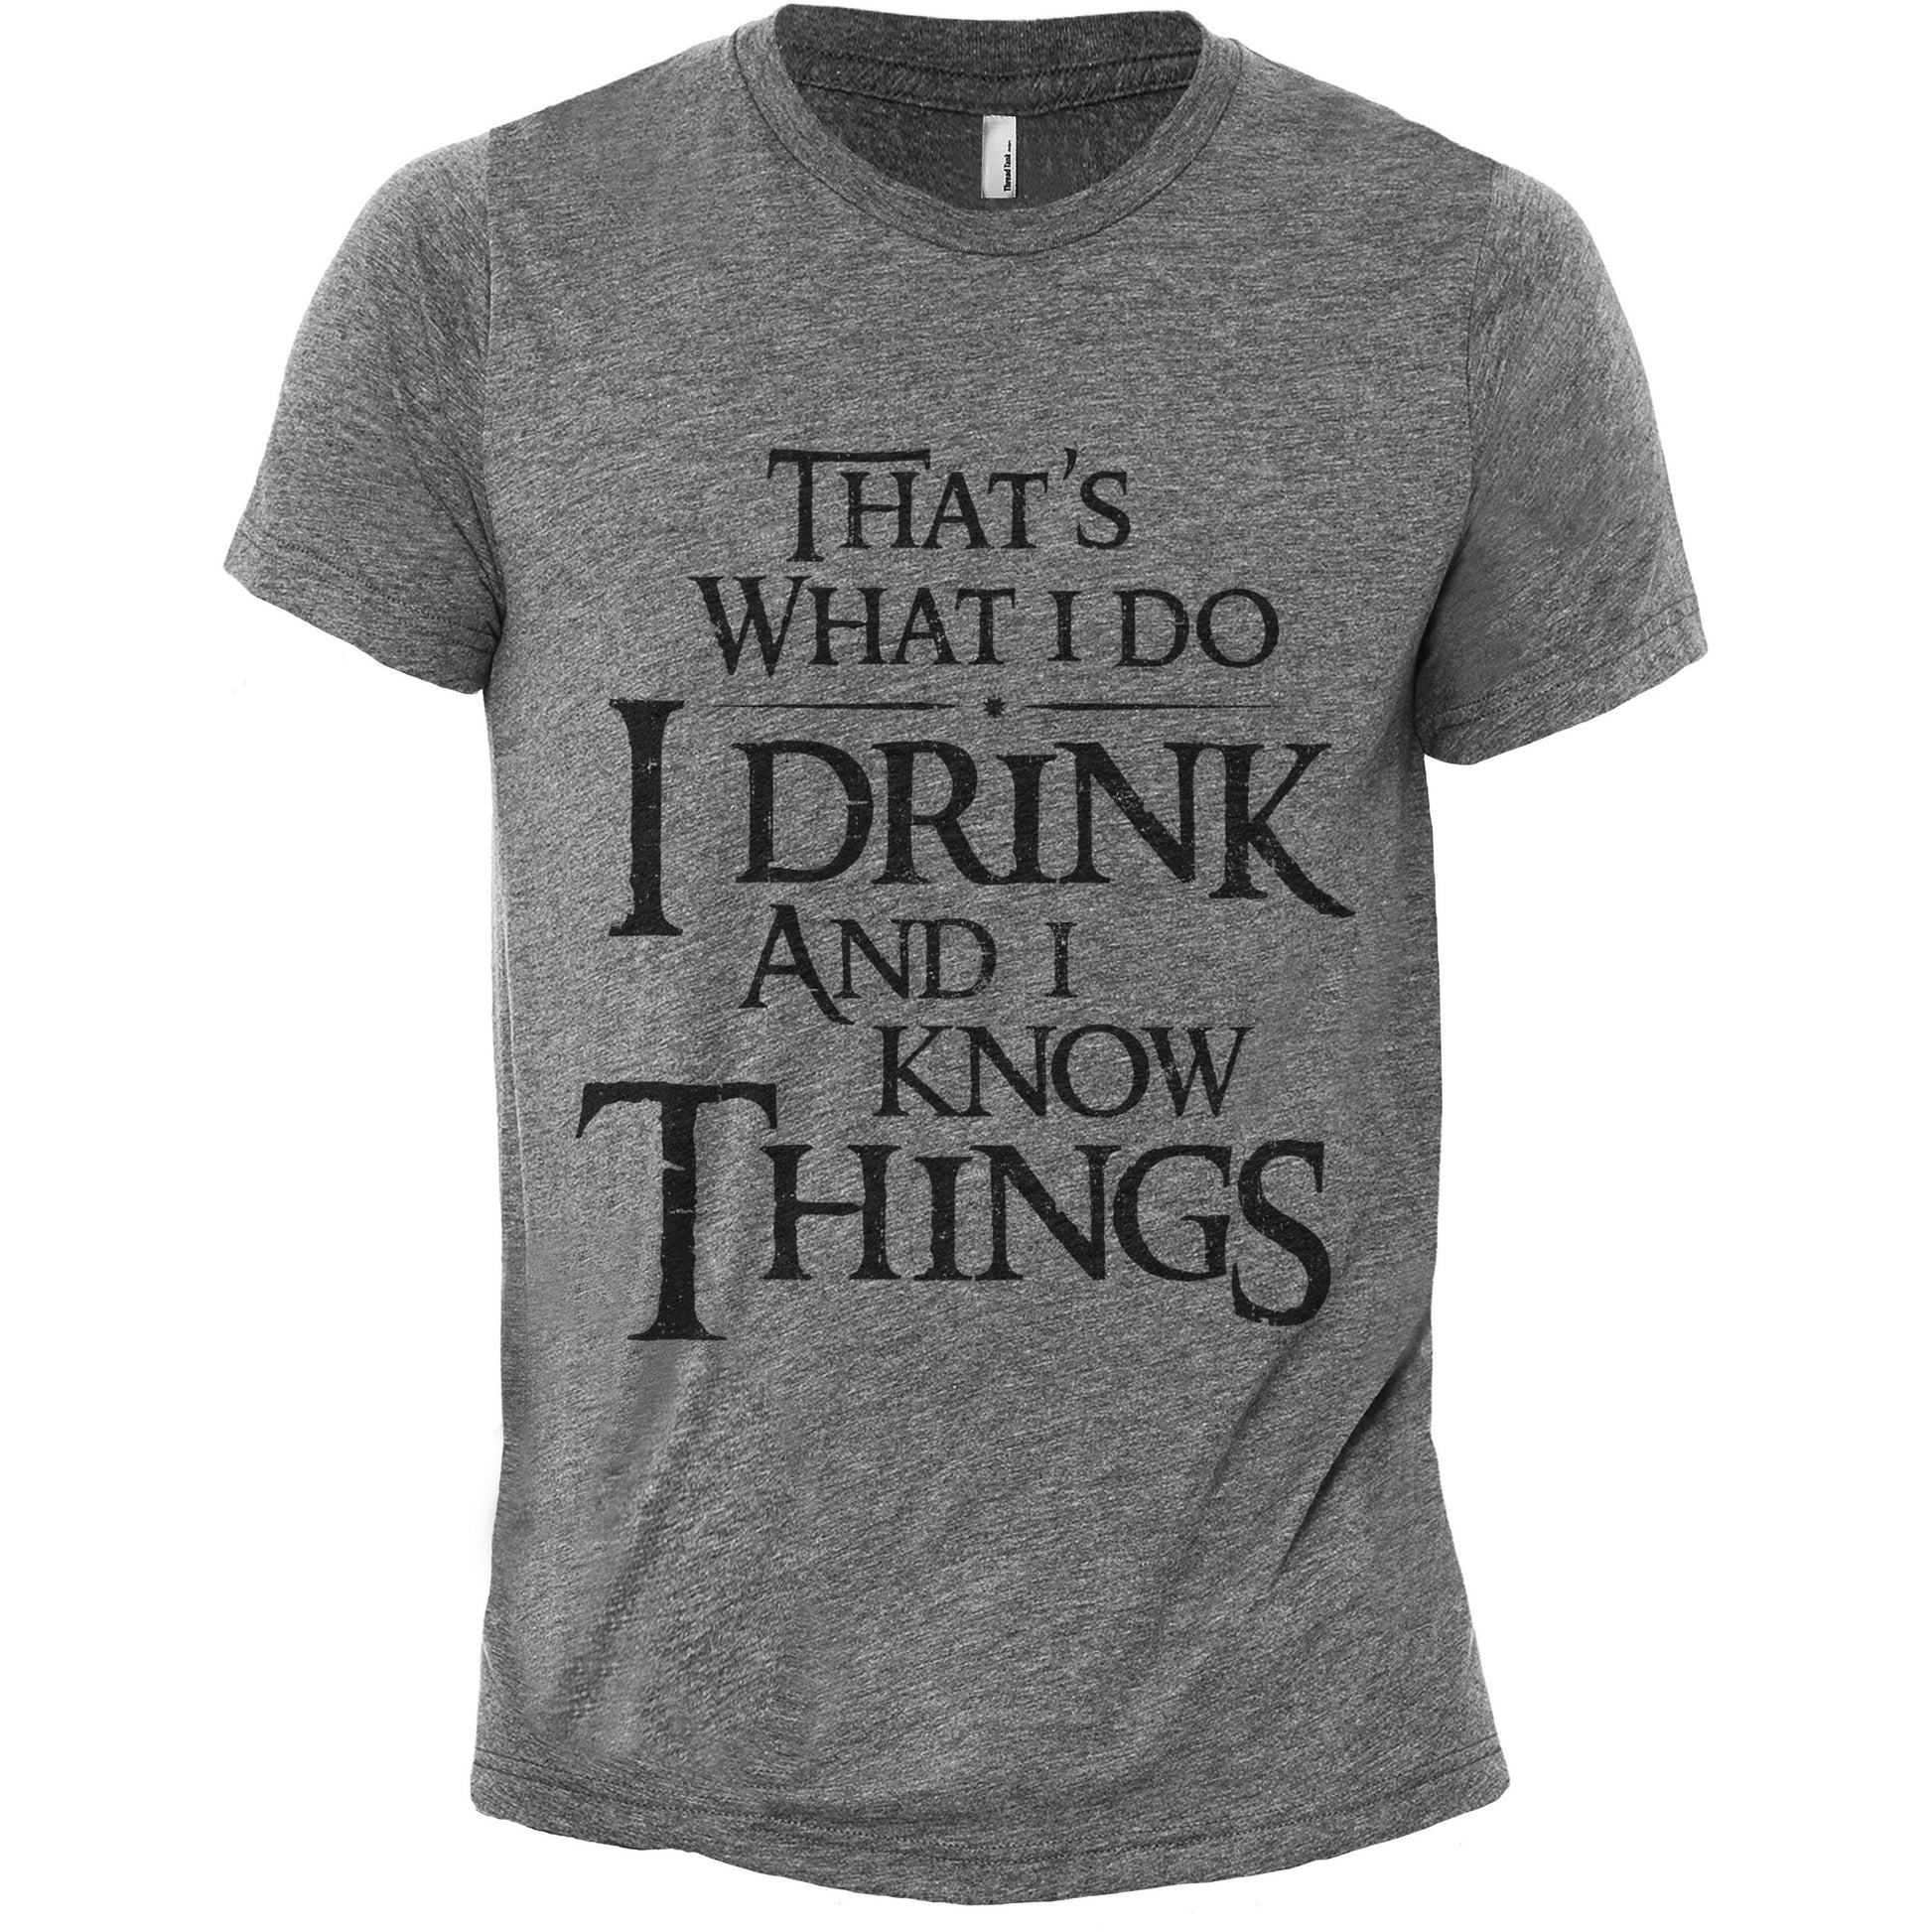 Thats What I Do I Drink And I Know Things Heather Grey Printed Graphic Men's Crew T-Shirt Tee